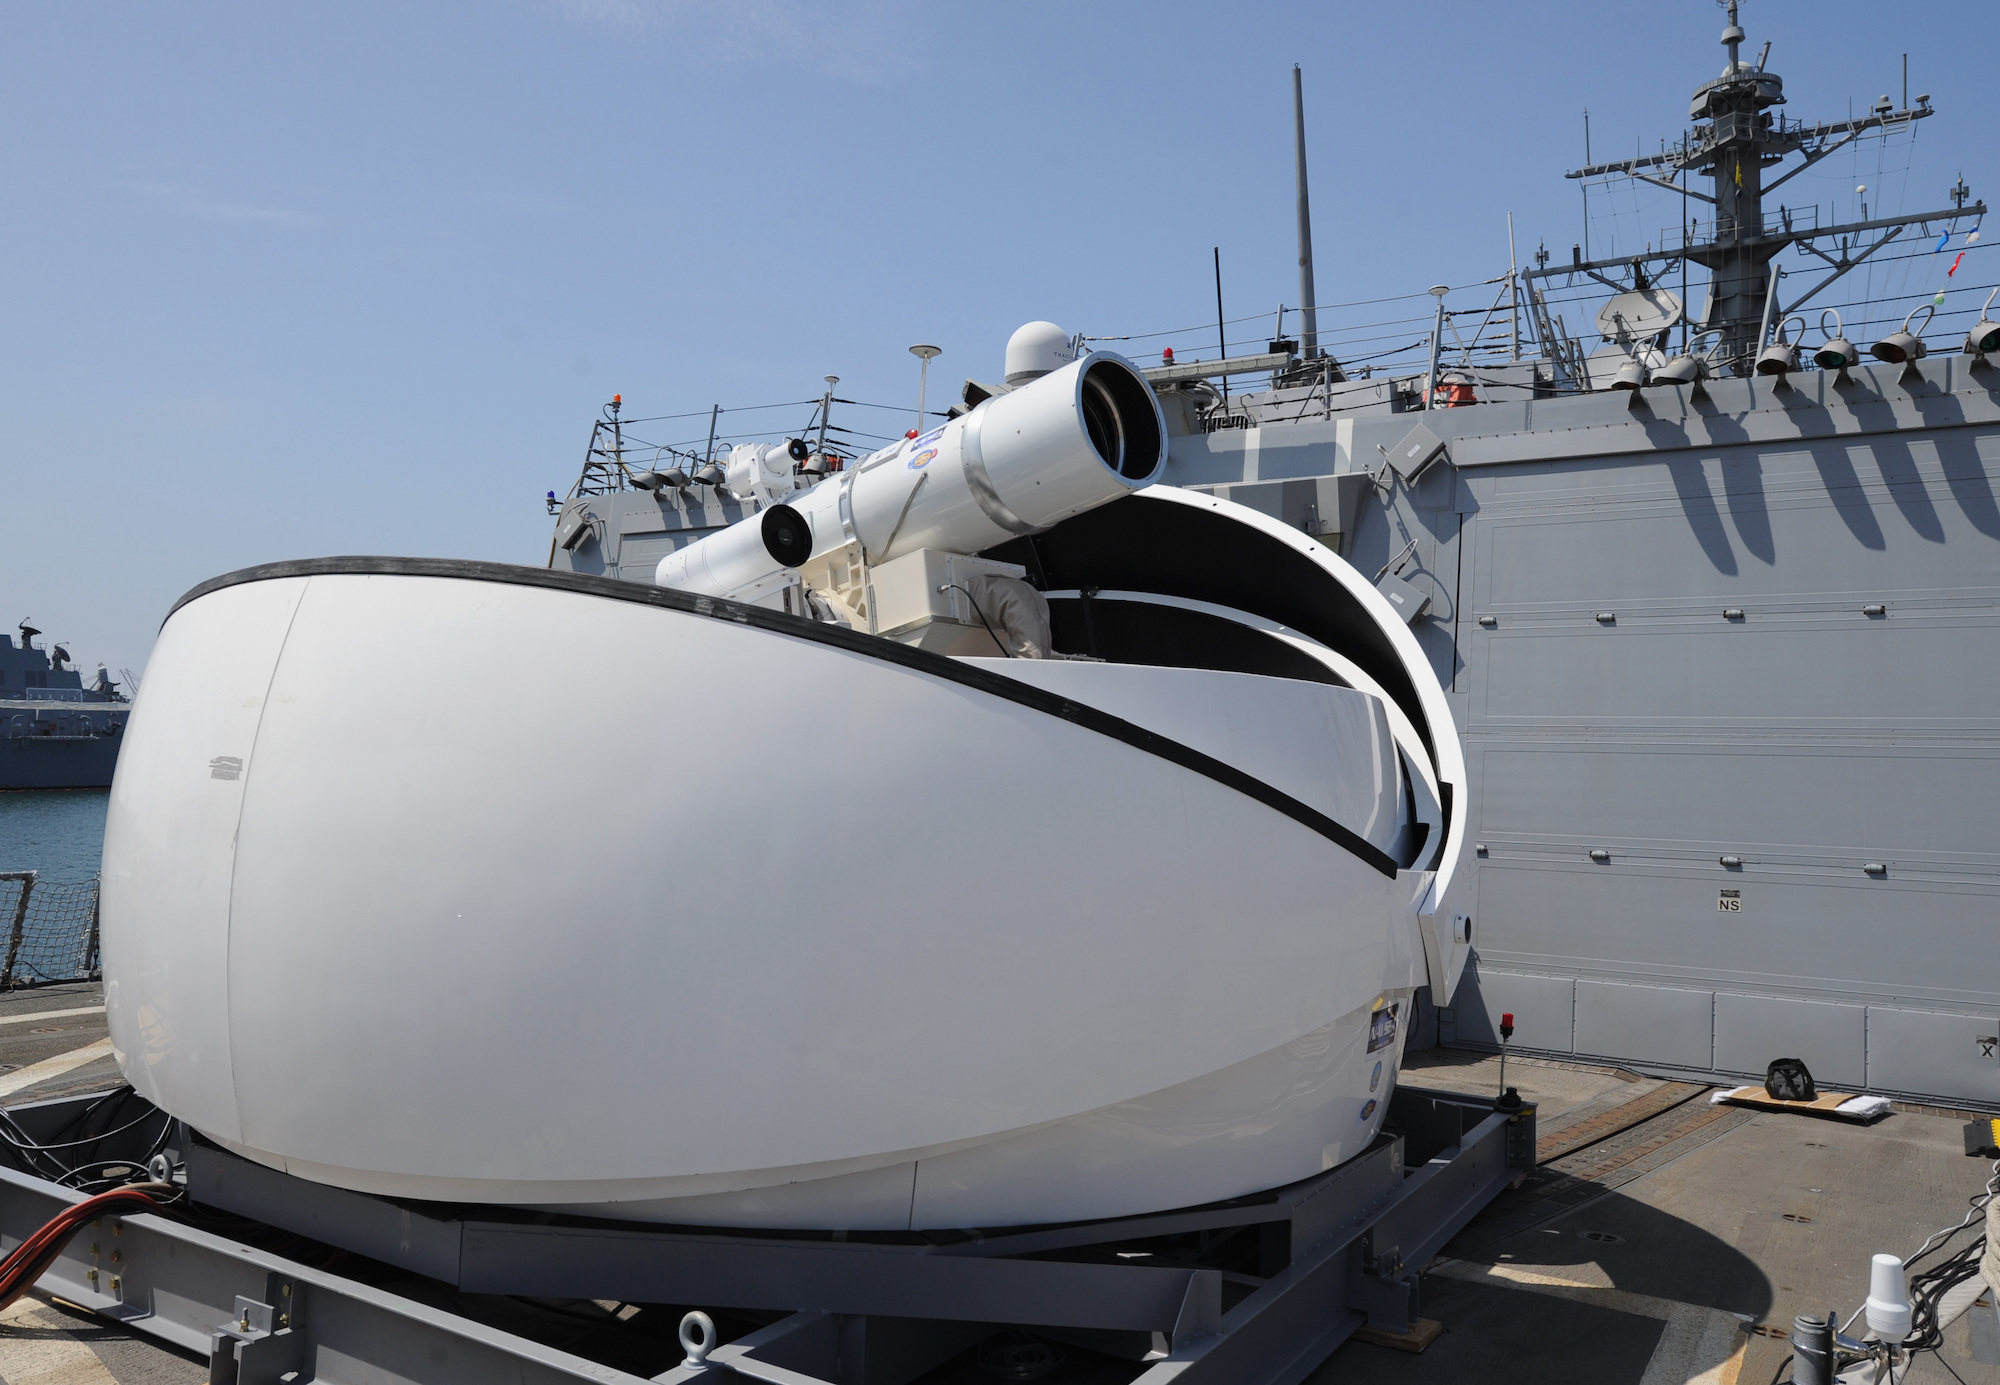 The UK’s solution for enemy drones? Lasers.